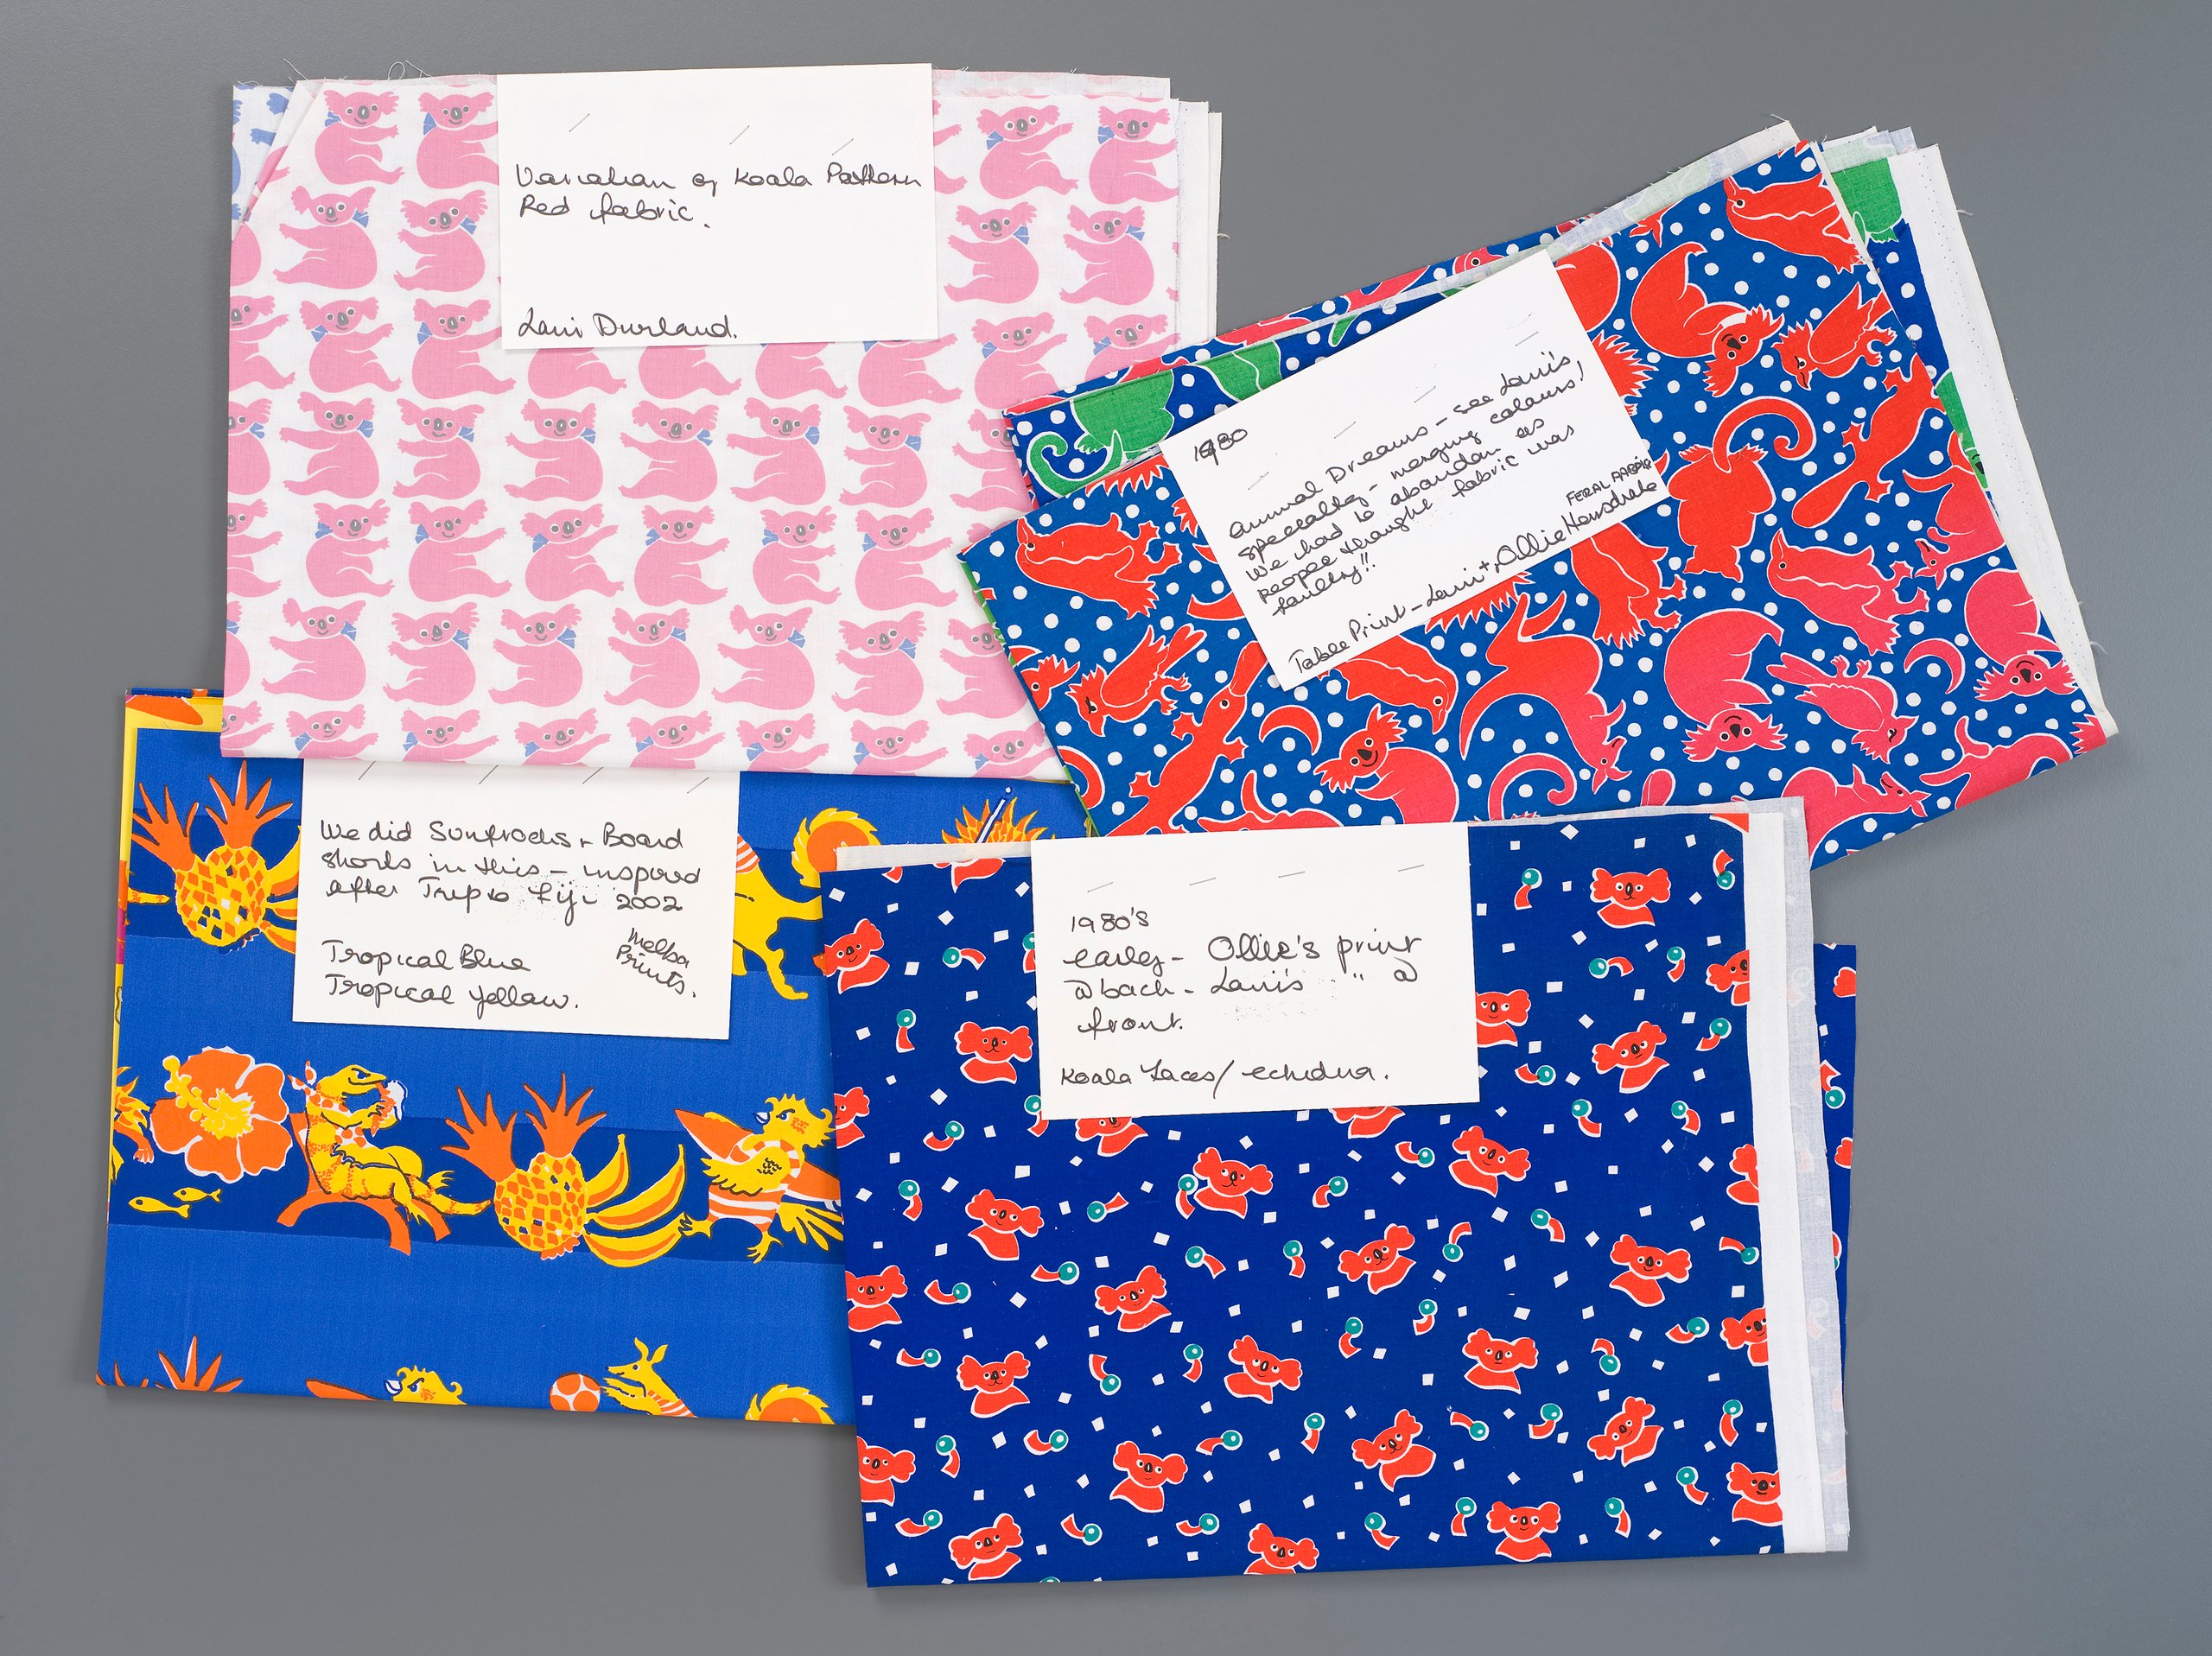 Textile swatches by Scribbly Graphics